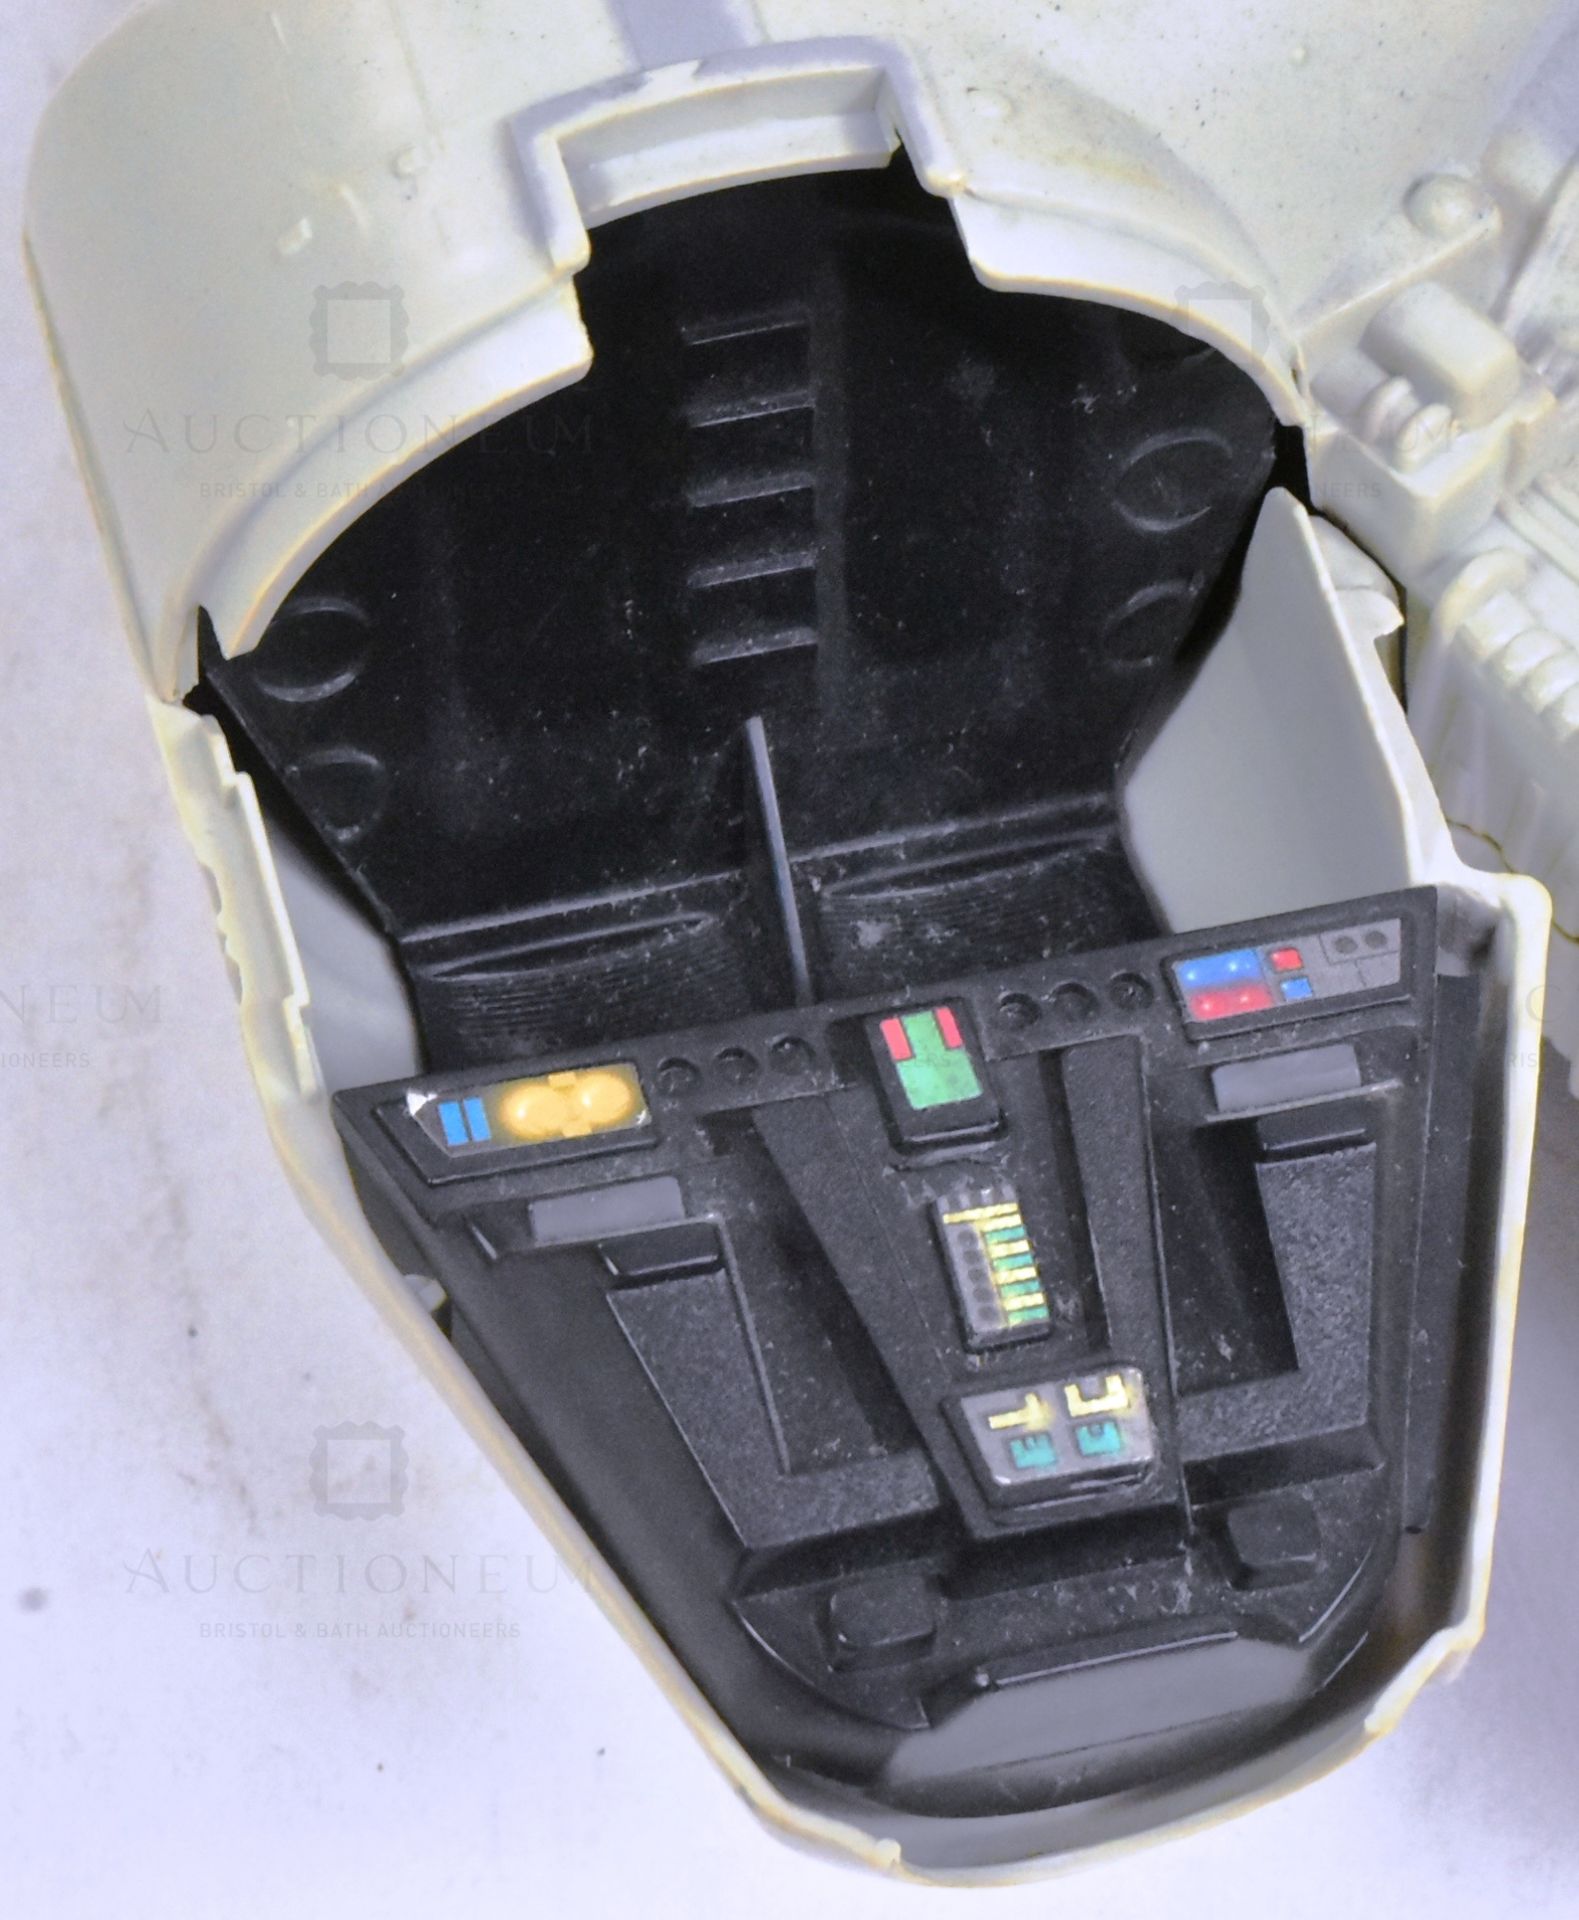 STAR WARS - 1995 KENNER ELECTRONIC MILLENNIUM FALCON - Image 5 of 6